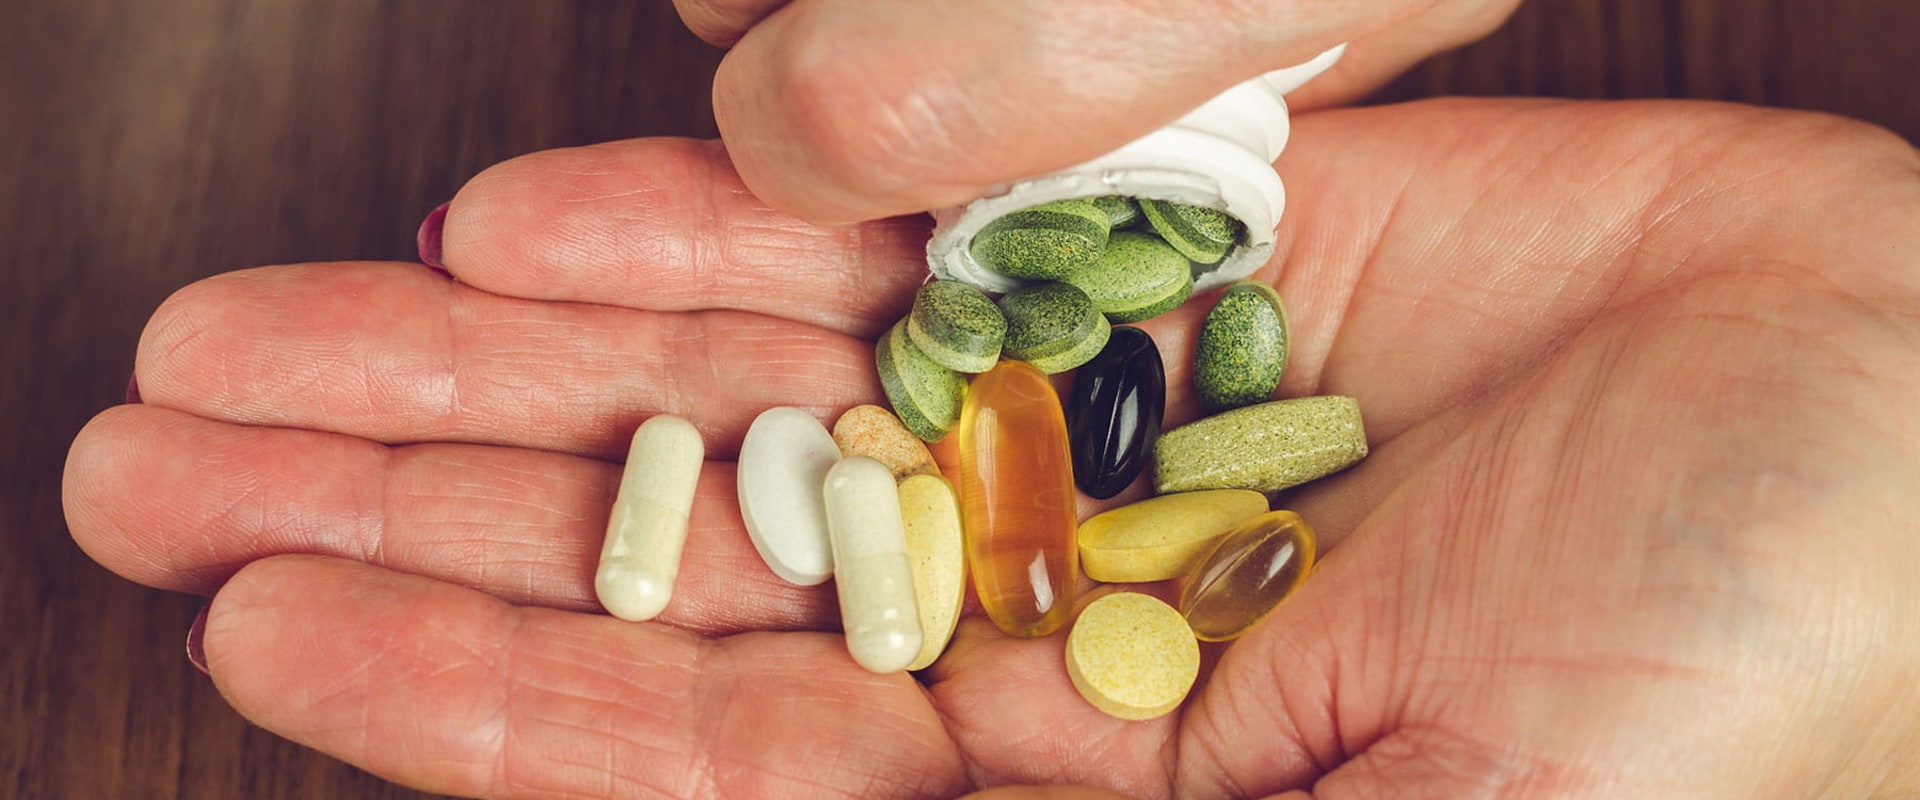 Can i take supplements long term?